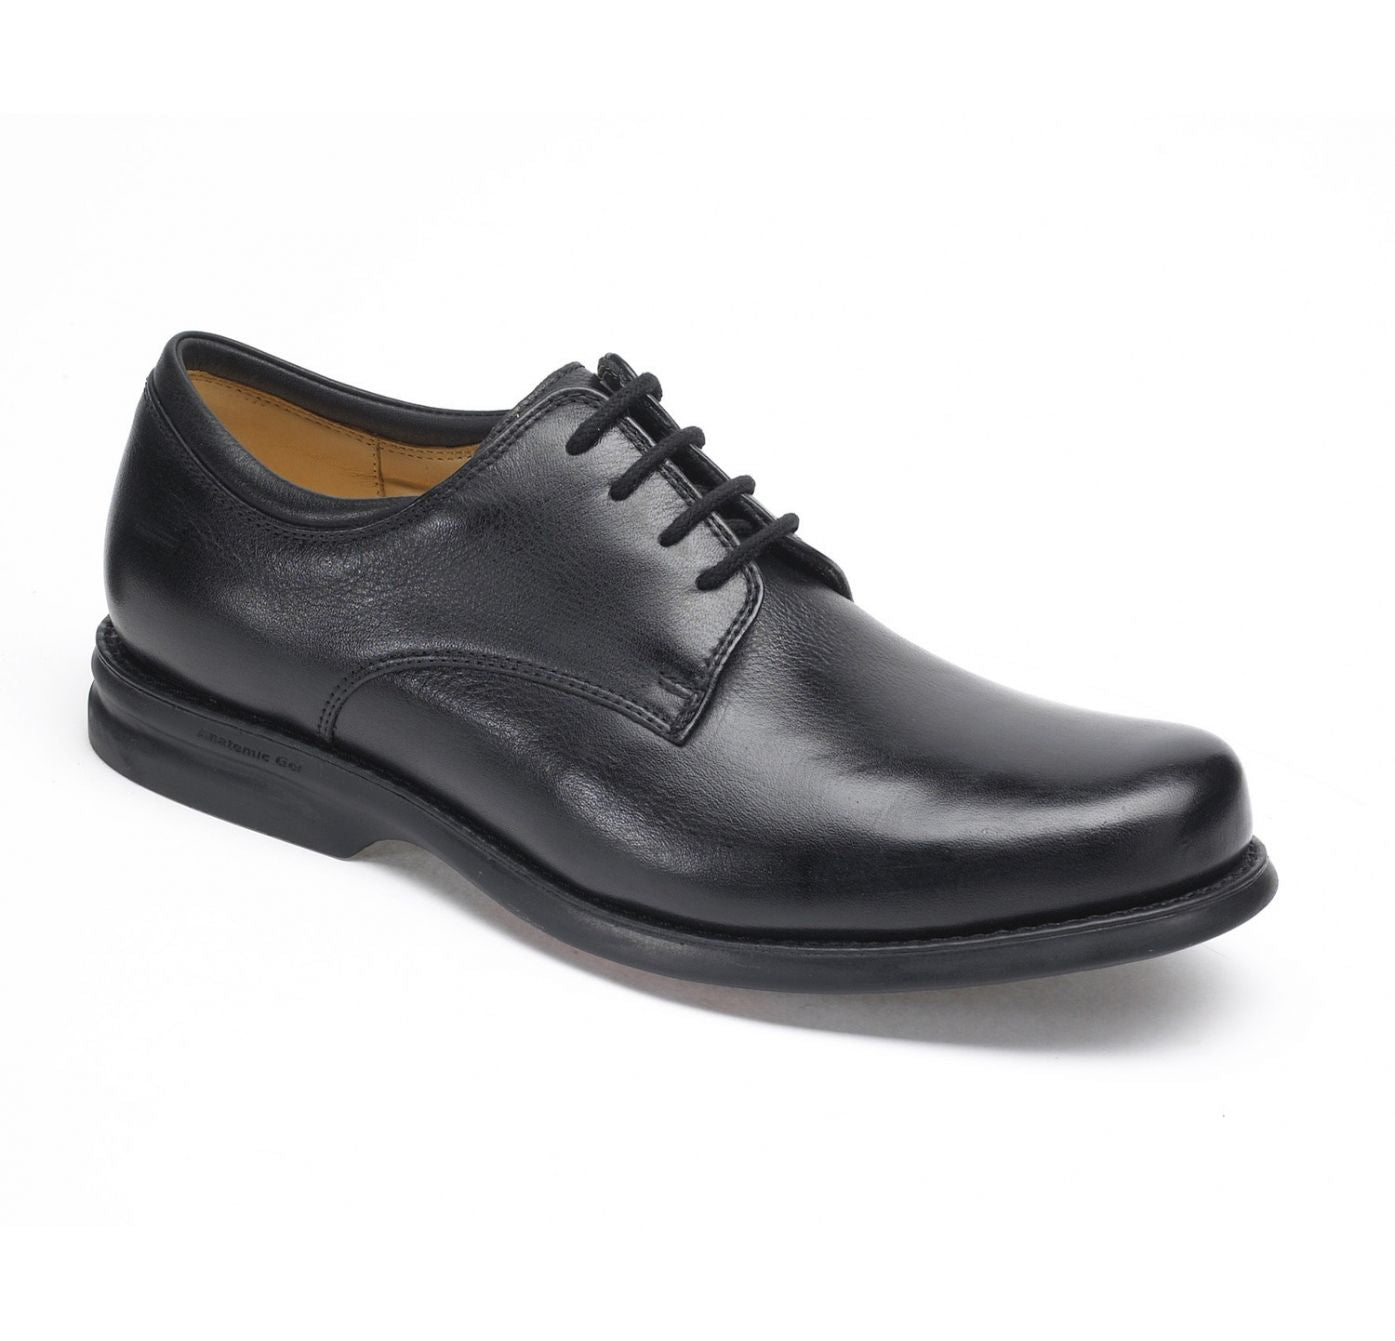 Anatomic Niteroi Mens Black Leather Lace Up Shoes - elevate your sole